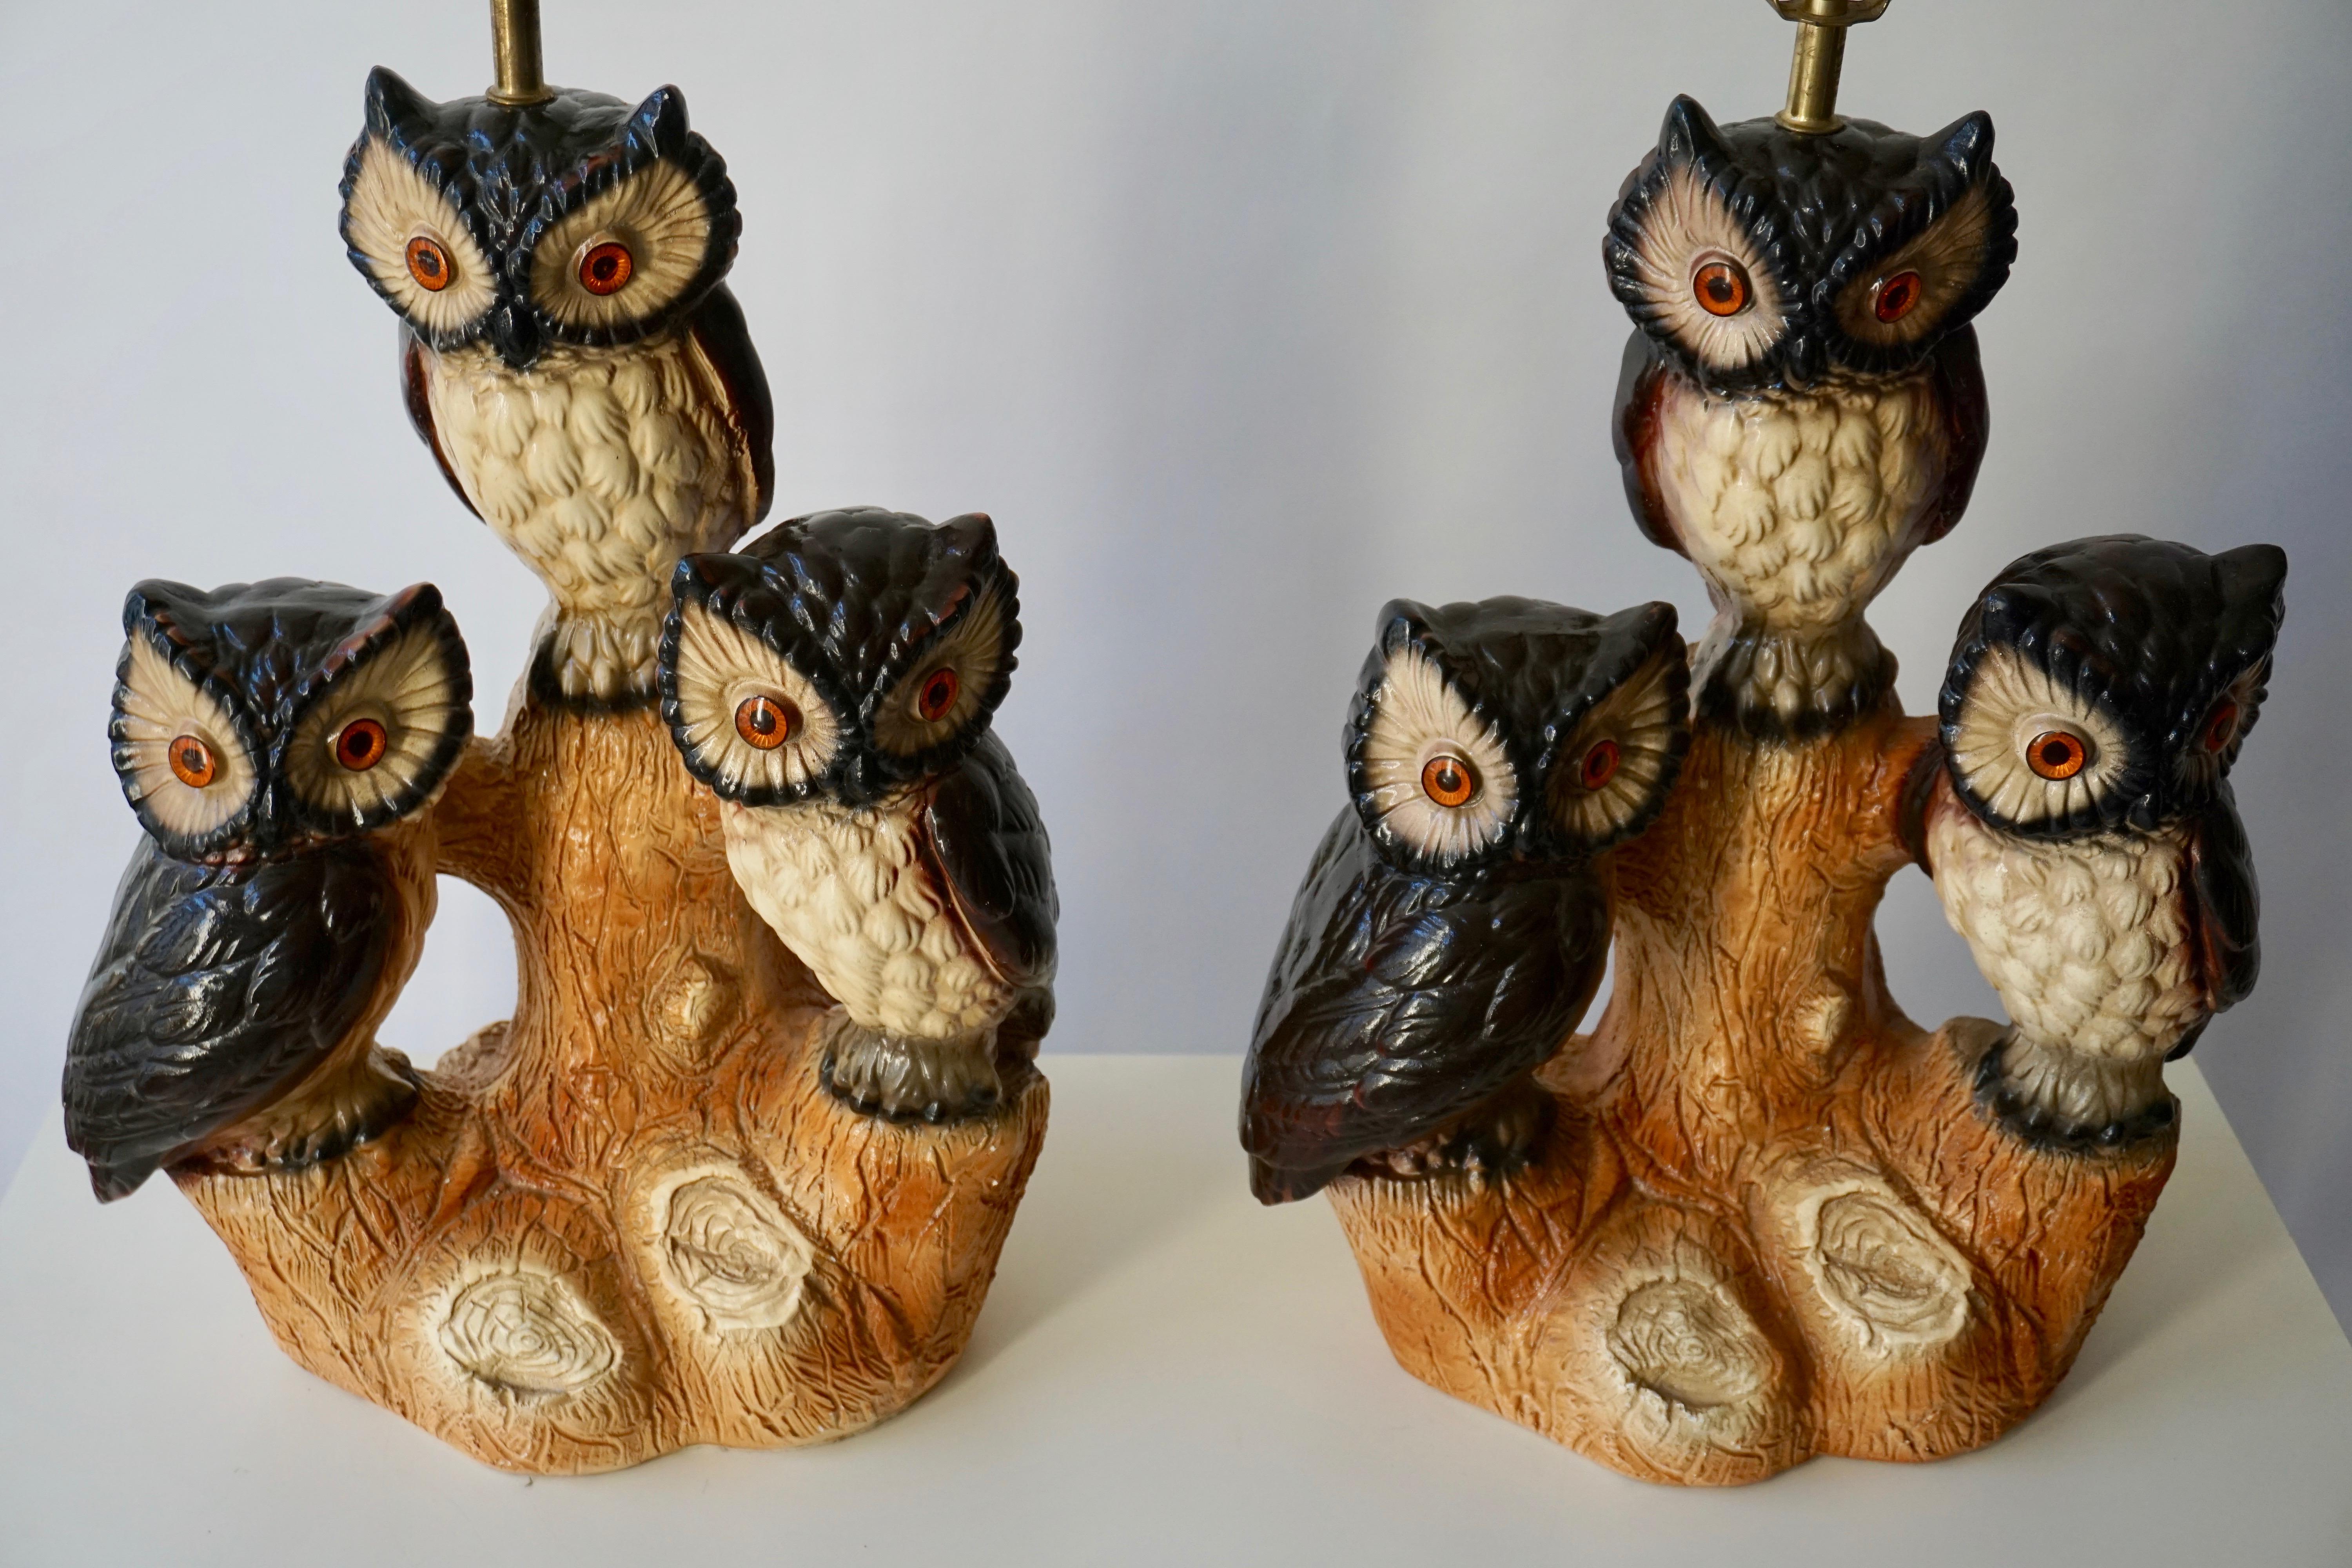 Mid-Century Modern Sculptural Ceramic Owl Lamps, 1970s For Sale 1